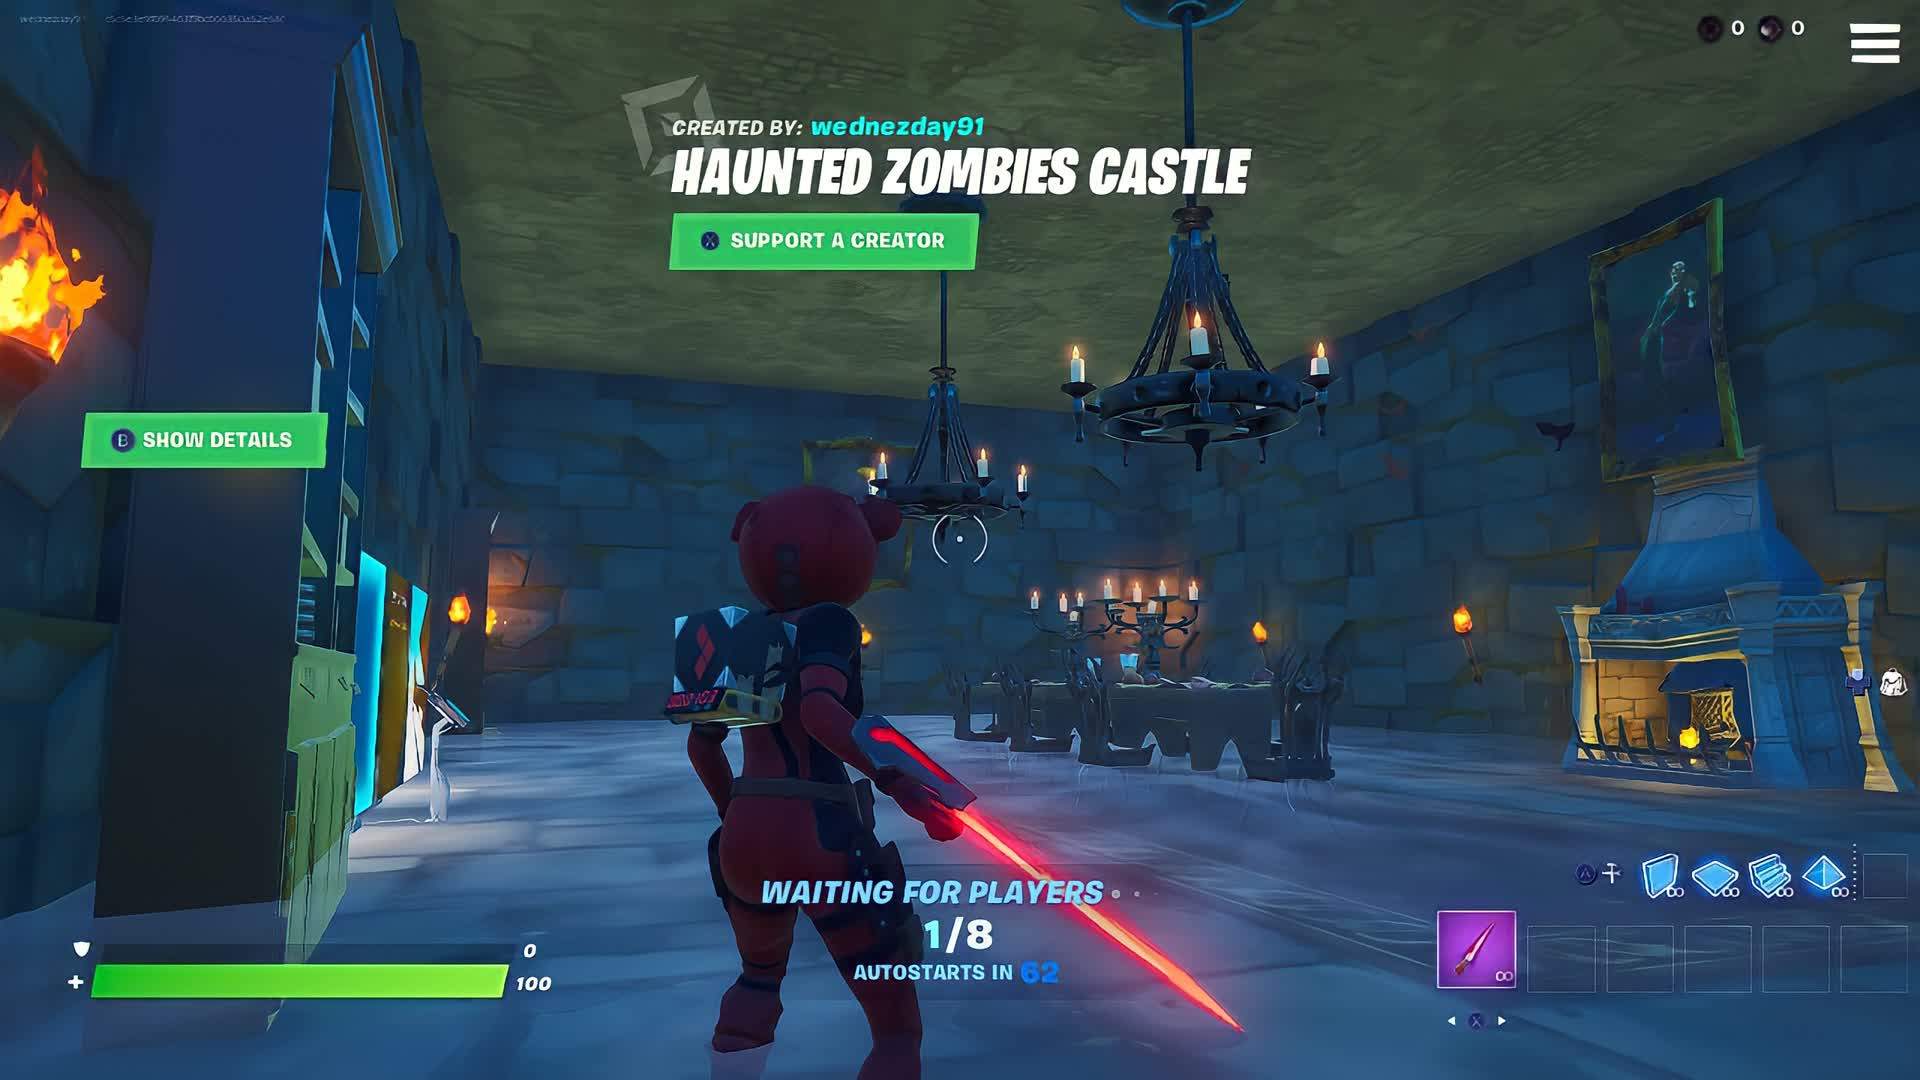 HAUNTED ZOMBIES CASTLE